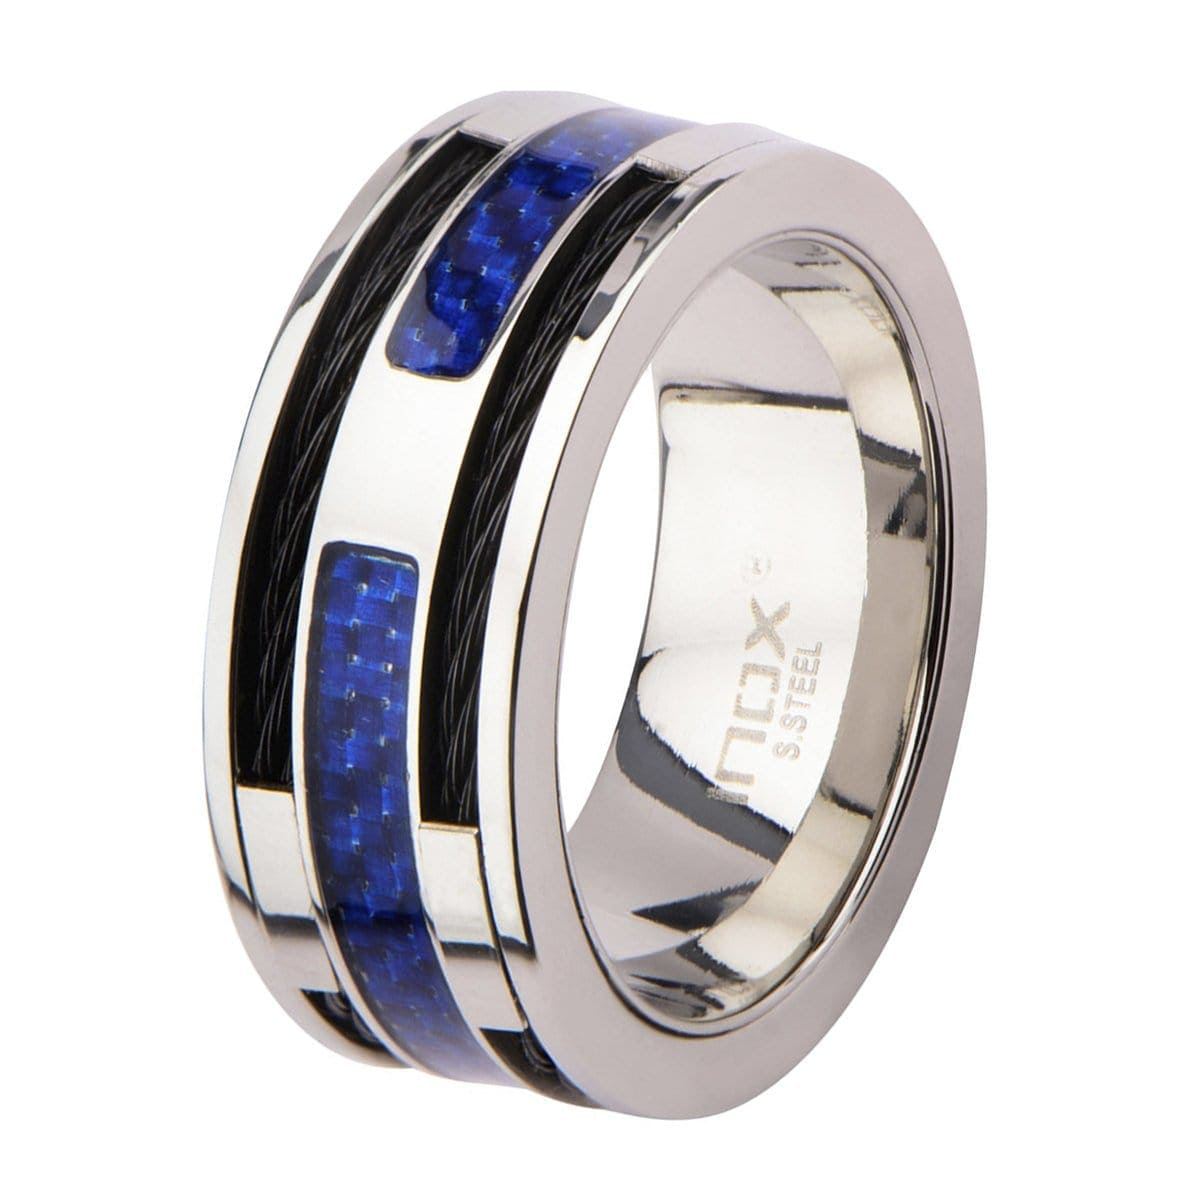 INOX JEWELRY Rings Silver Tone Stainless Steel Black Cable and Blue Carbon Fiber Ring